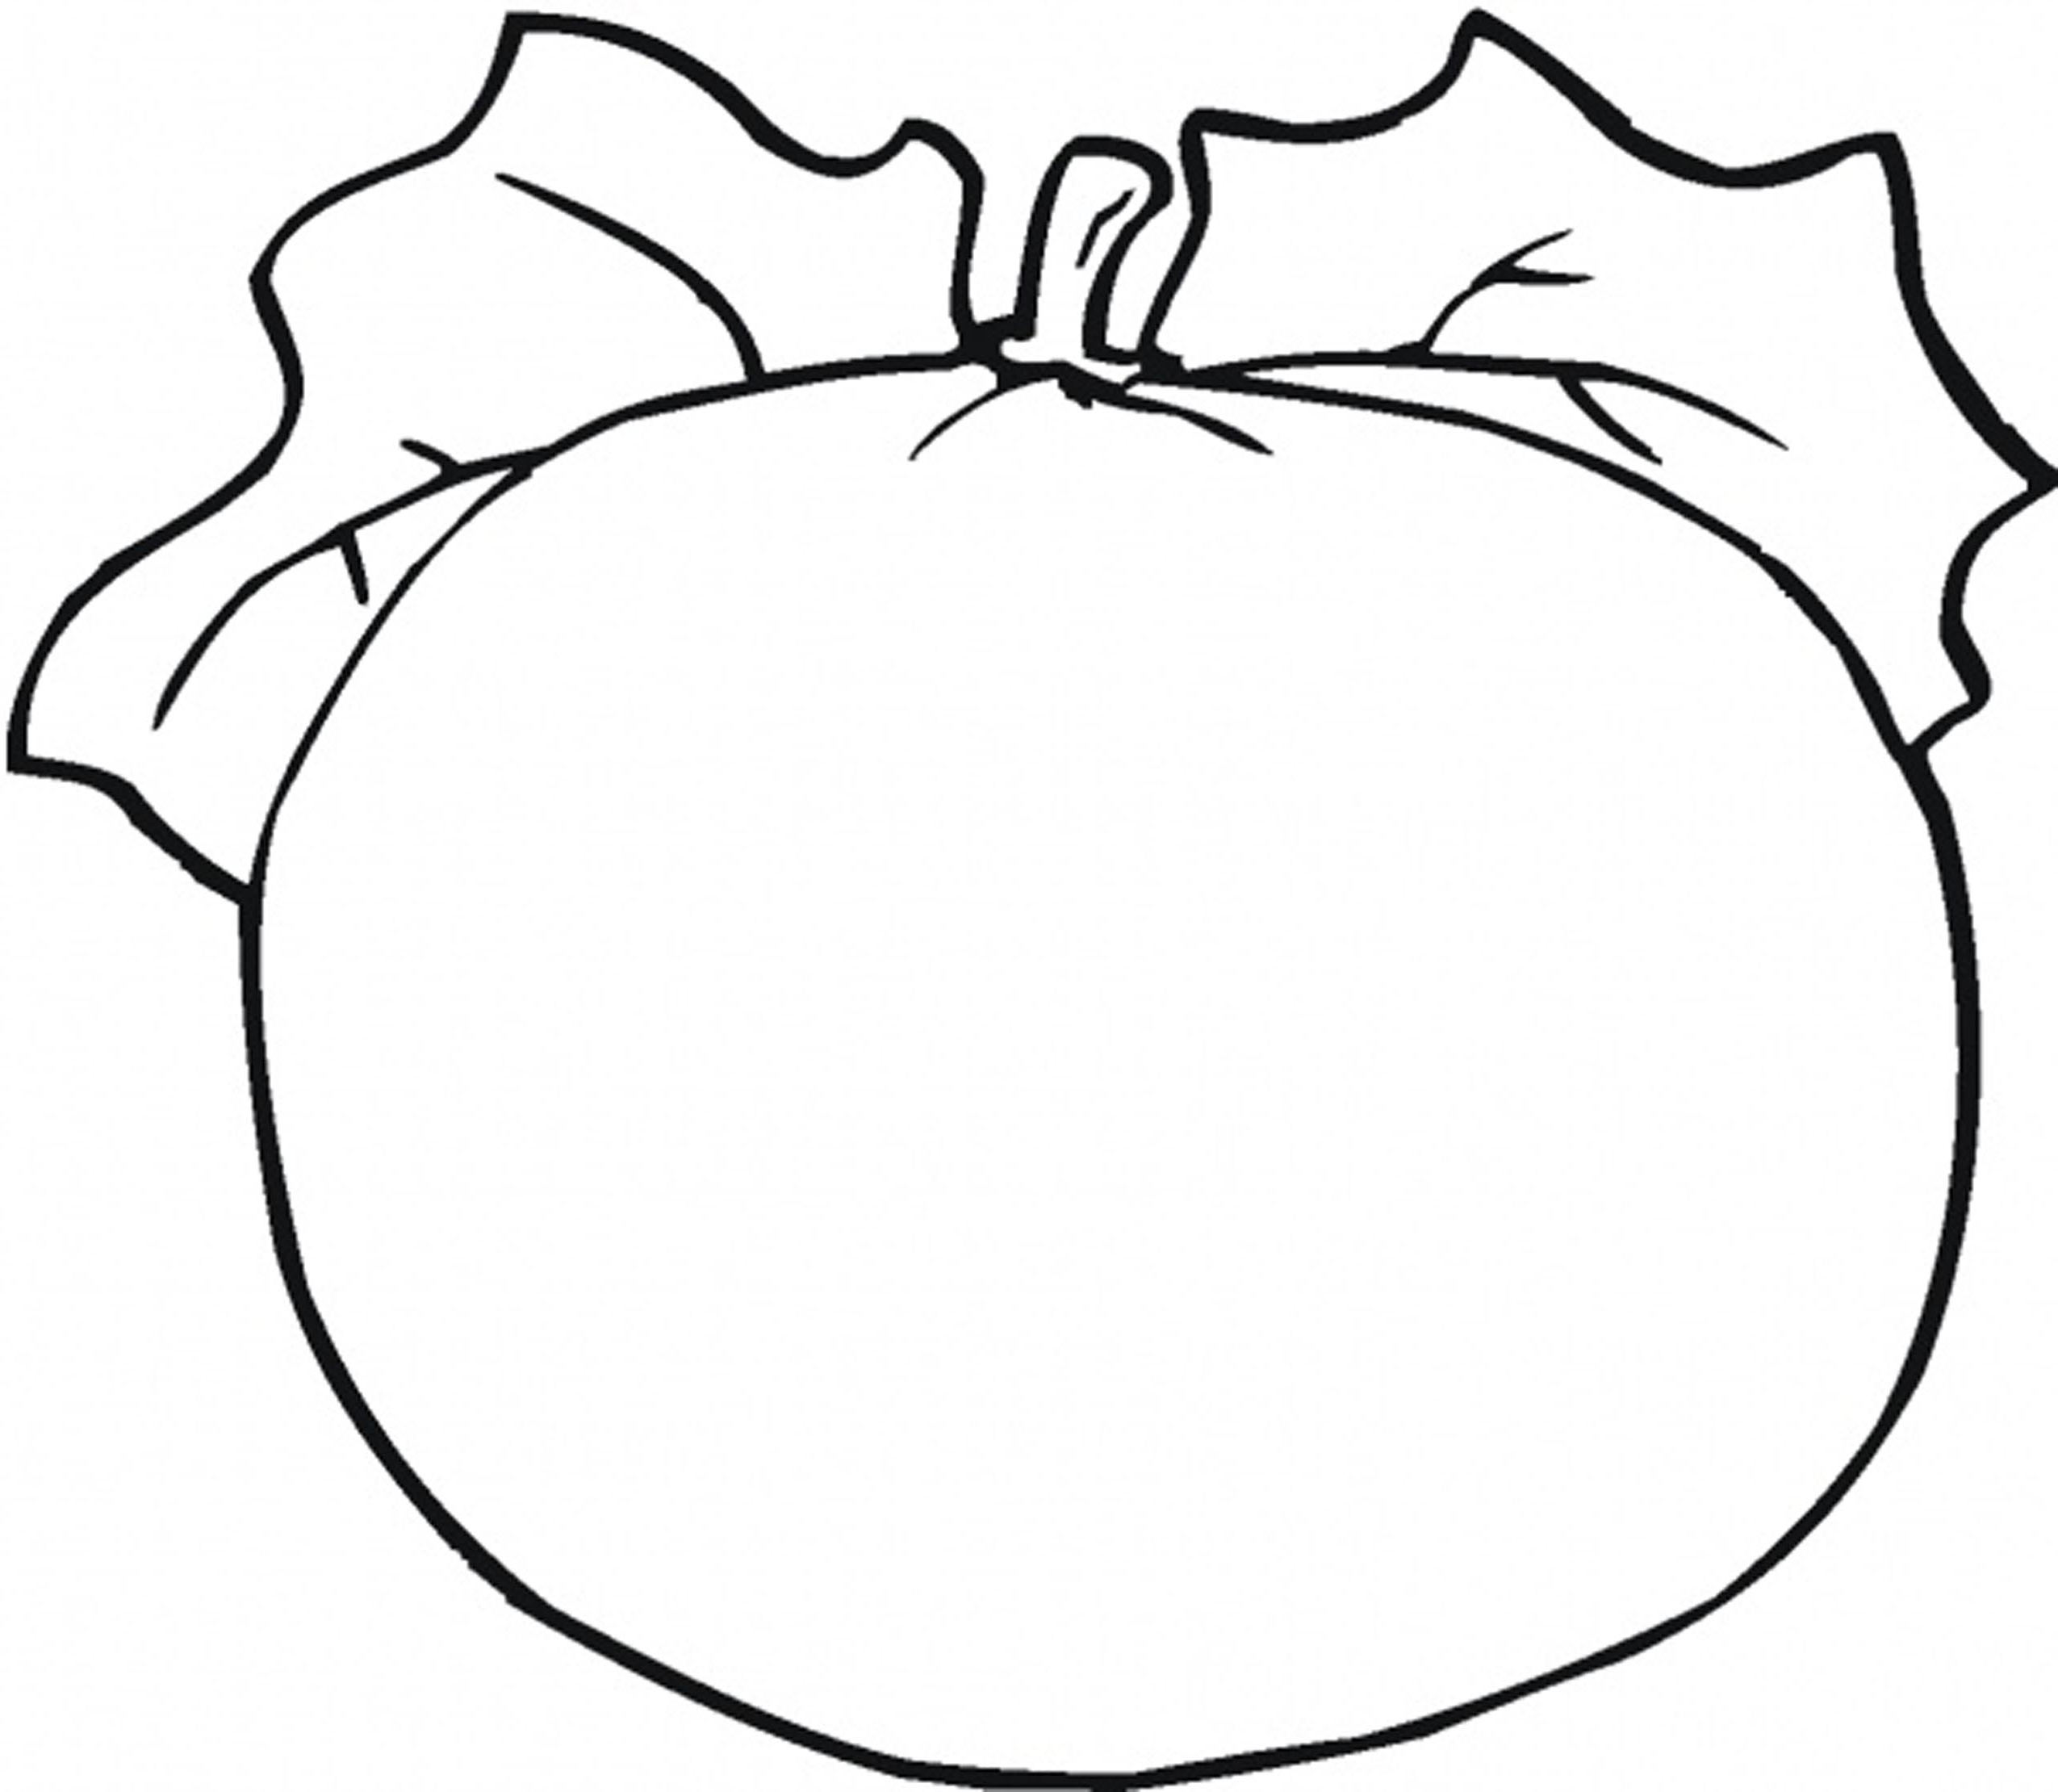 Coloring page: Pumpkin (Objects) #166976 - Free Printable Coloring Pages